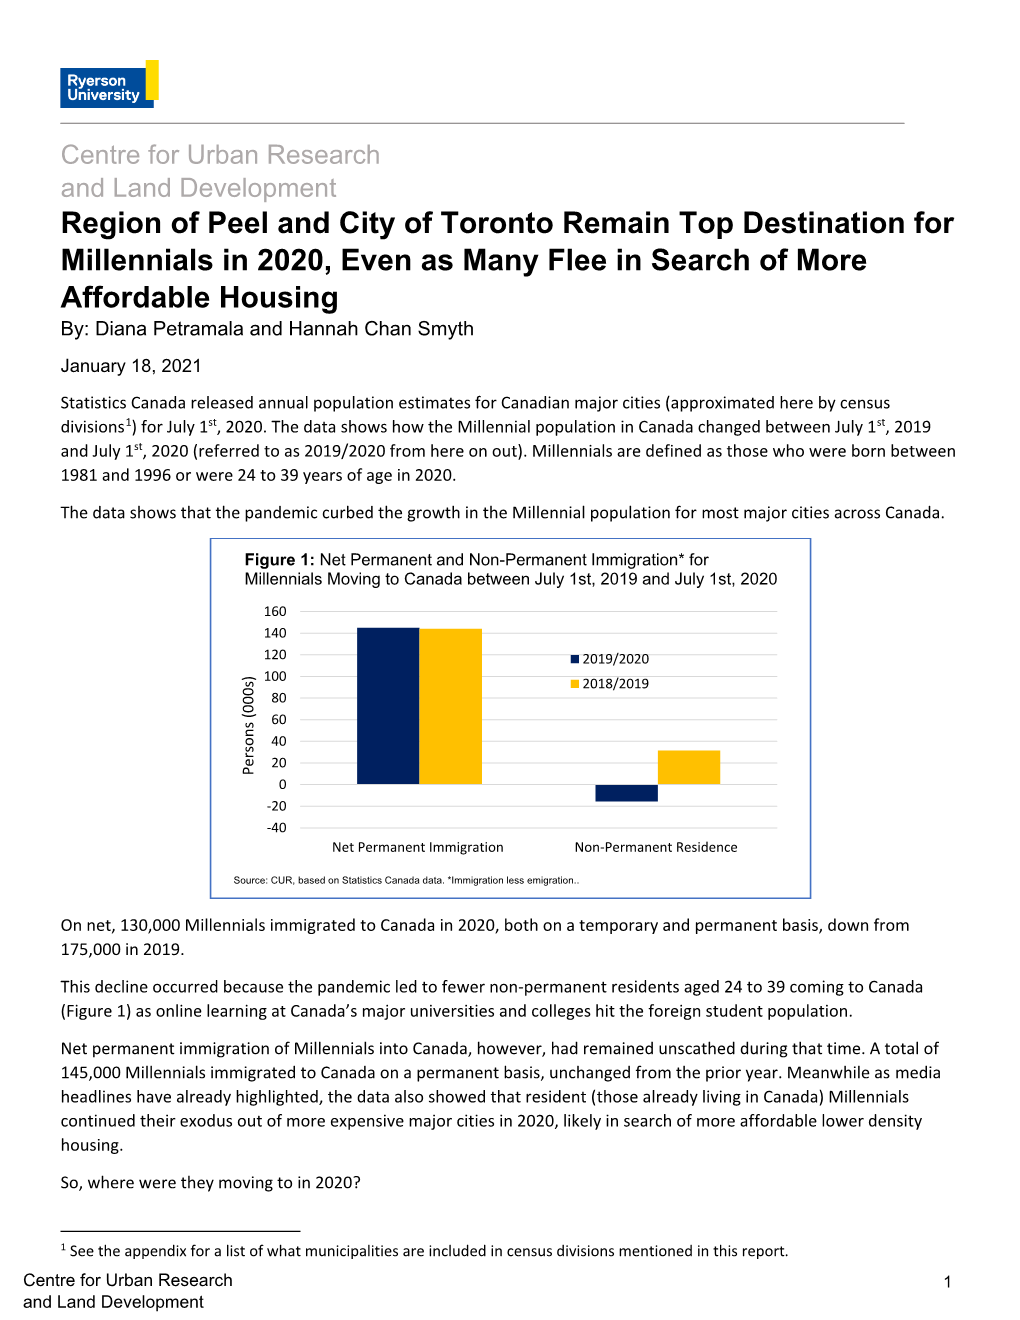 Region of Peel and City of Toronto Remain Top Destination For